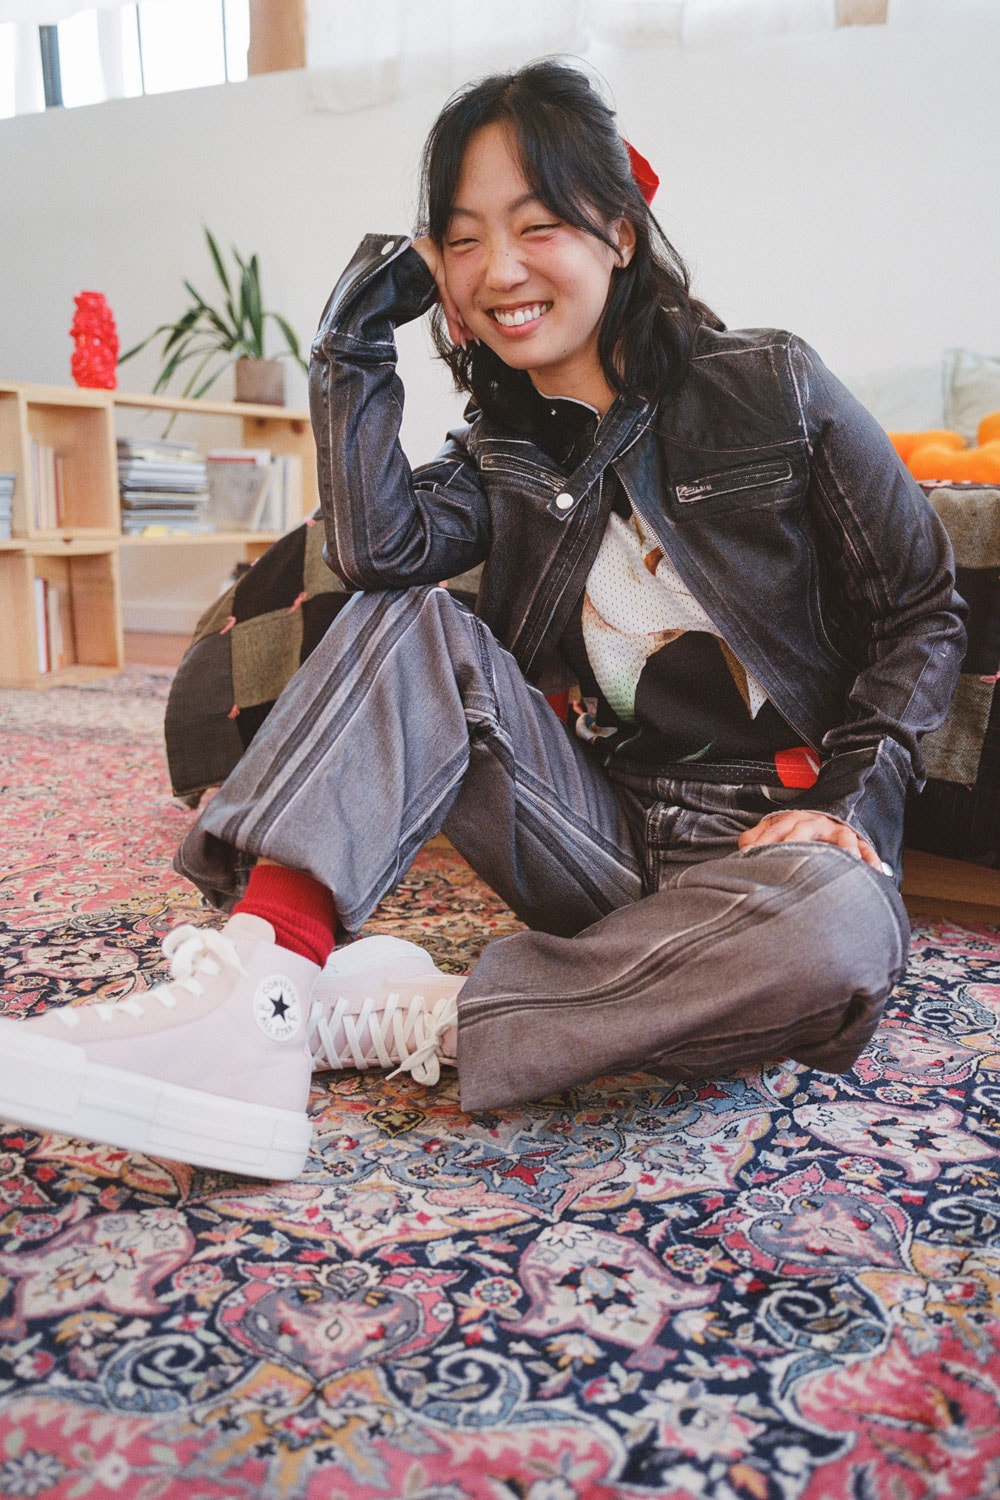 converse eunice chang style residency ctas cruise sneaker chuck taylor all star silhouette lace up high top shoe pink black blush skater skate 90s inspired los angeles california